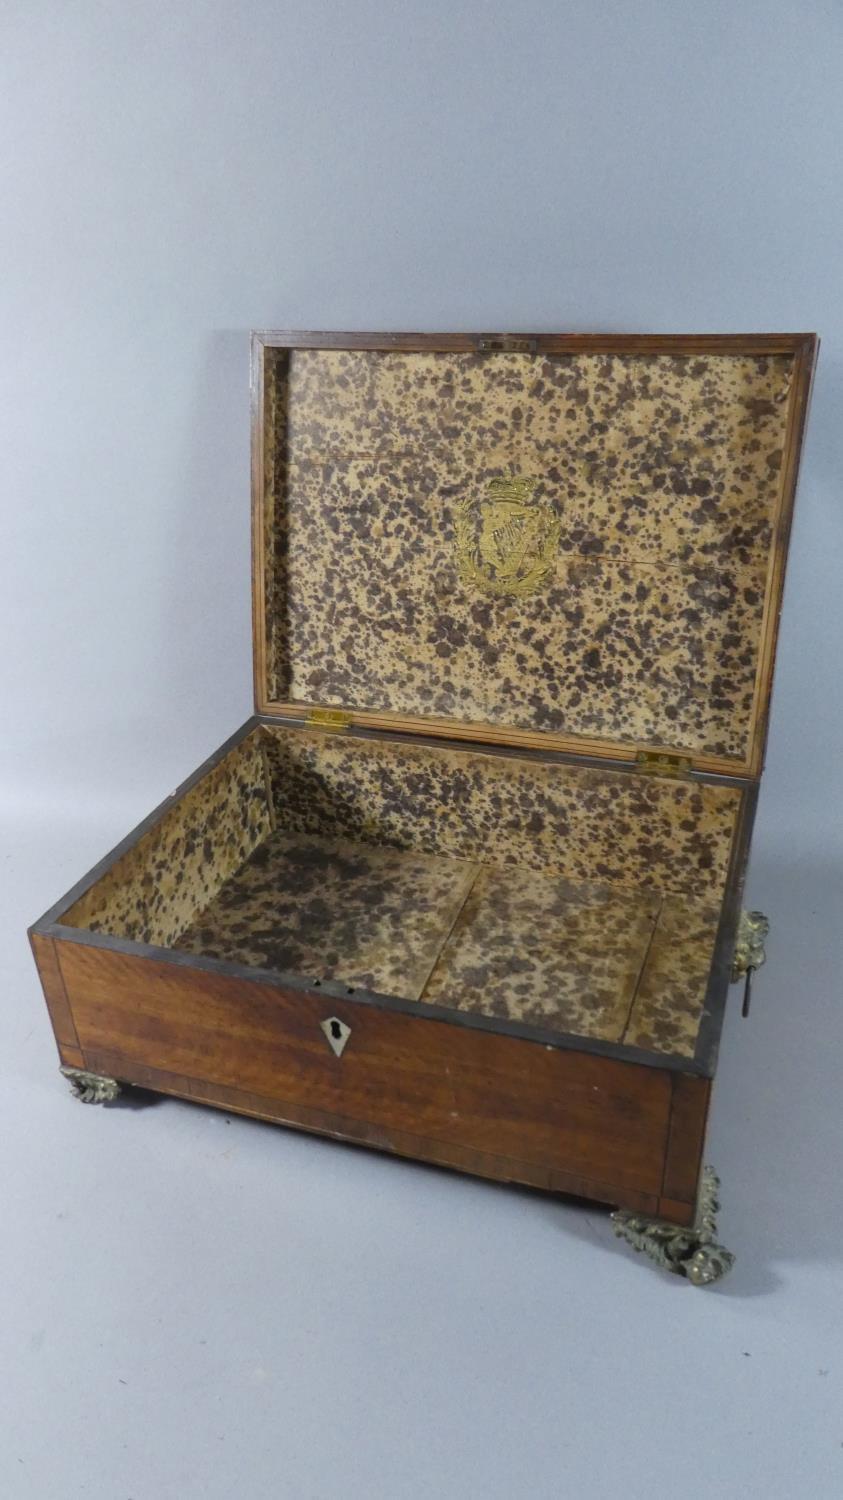 A 19th Century French Kingwood Ormolu Mounted Work Box for Restoration with Starburst Inlay to - Image 5 of 7